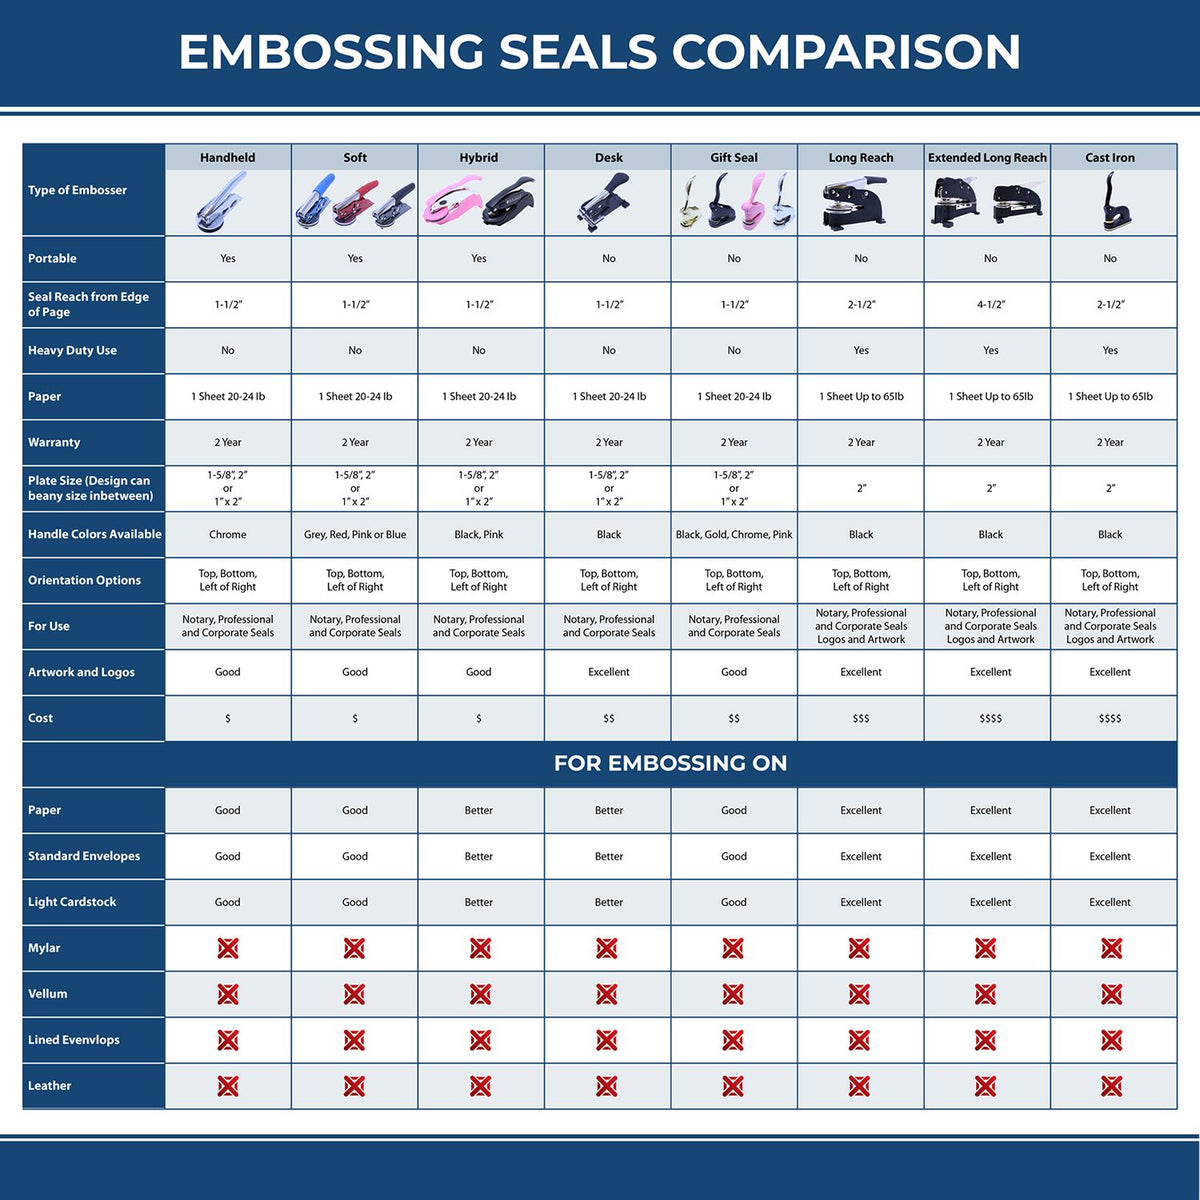 A comparison chart for the different types of mount models available for the Hybrid South Dakota Land Surveyor Seal